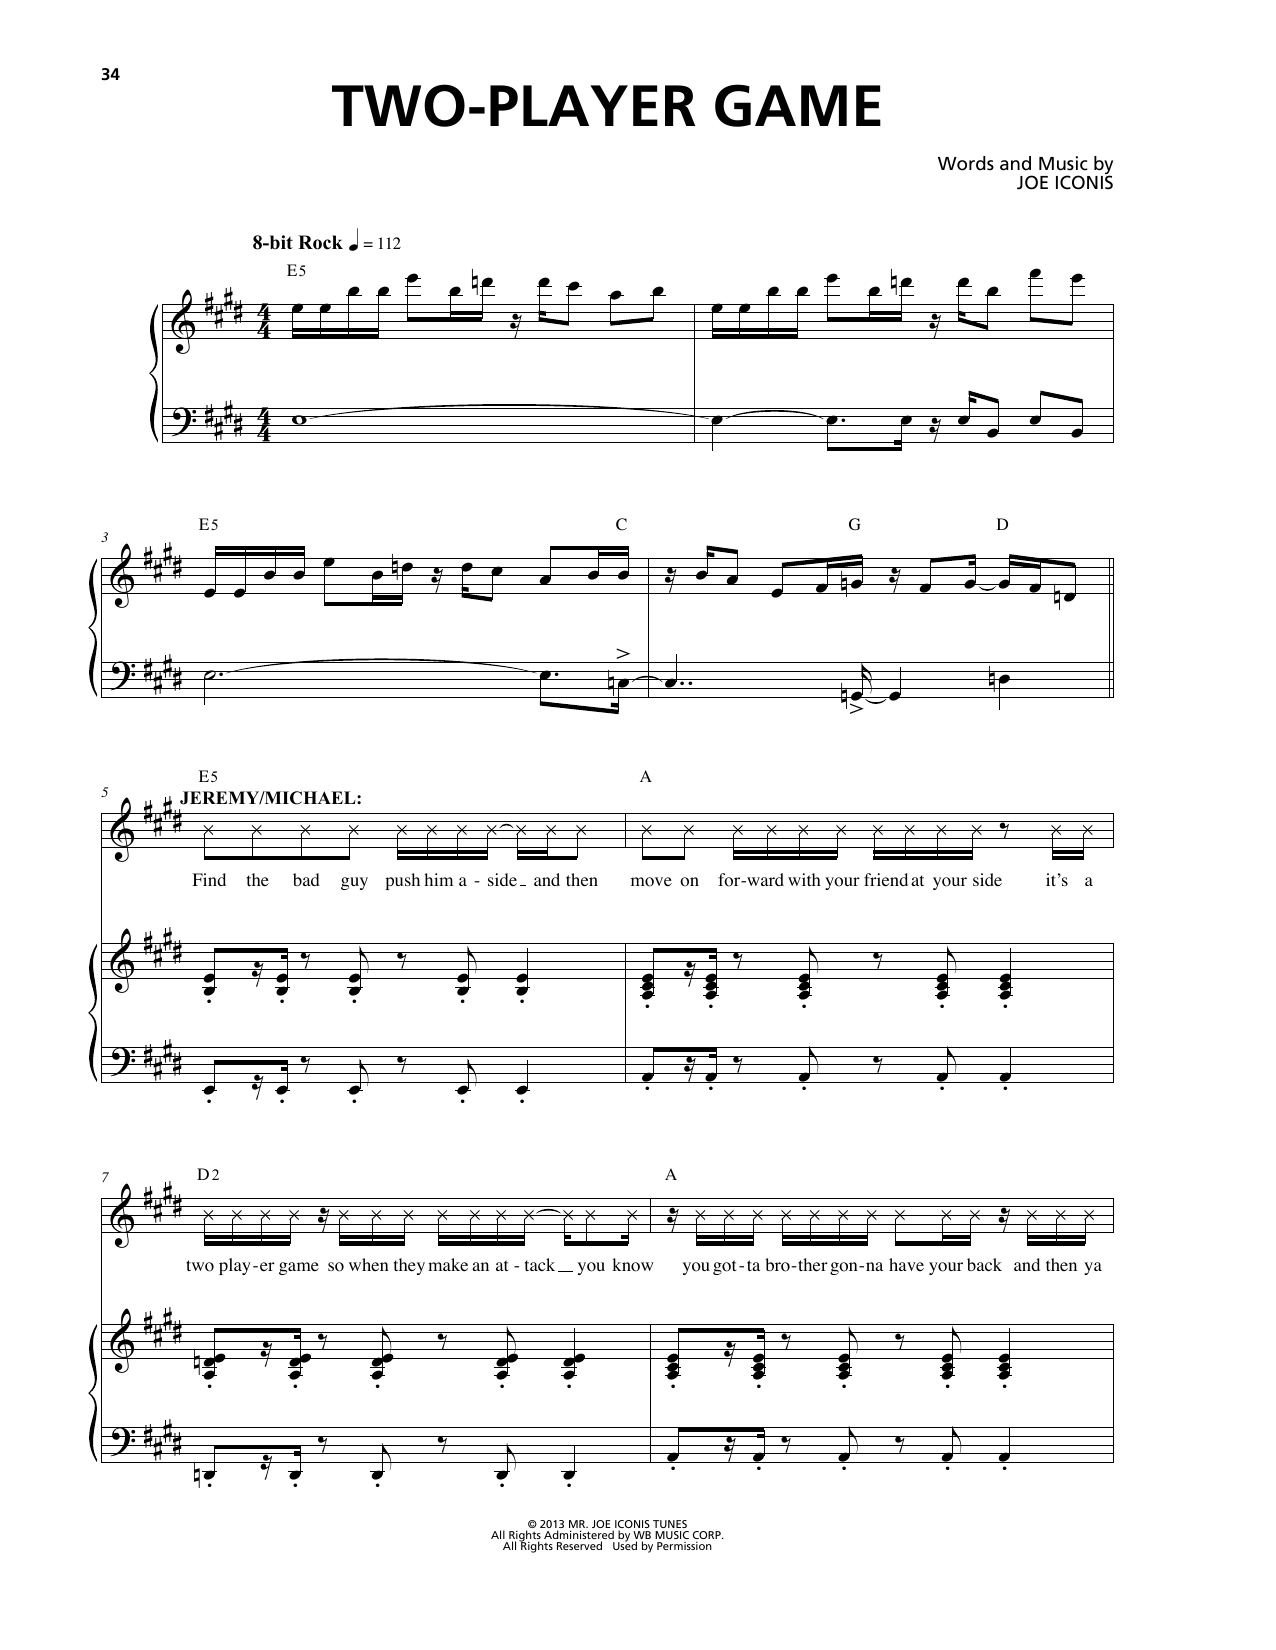 Download Joe Iconis Two-Player Game (from Be More Chill) Sheet Music